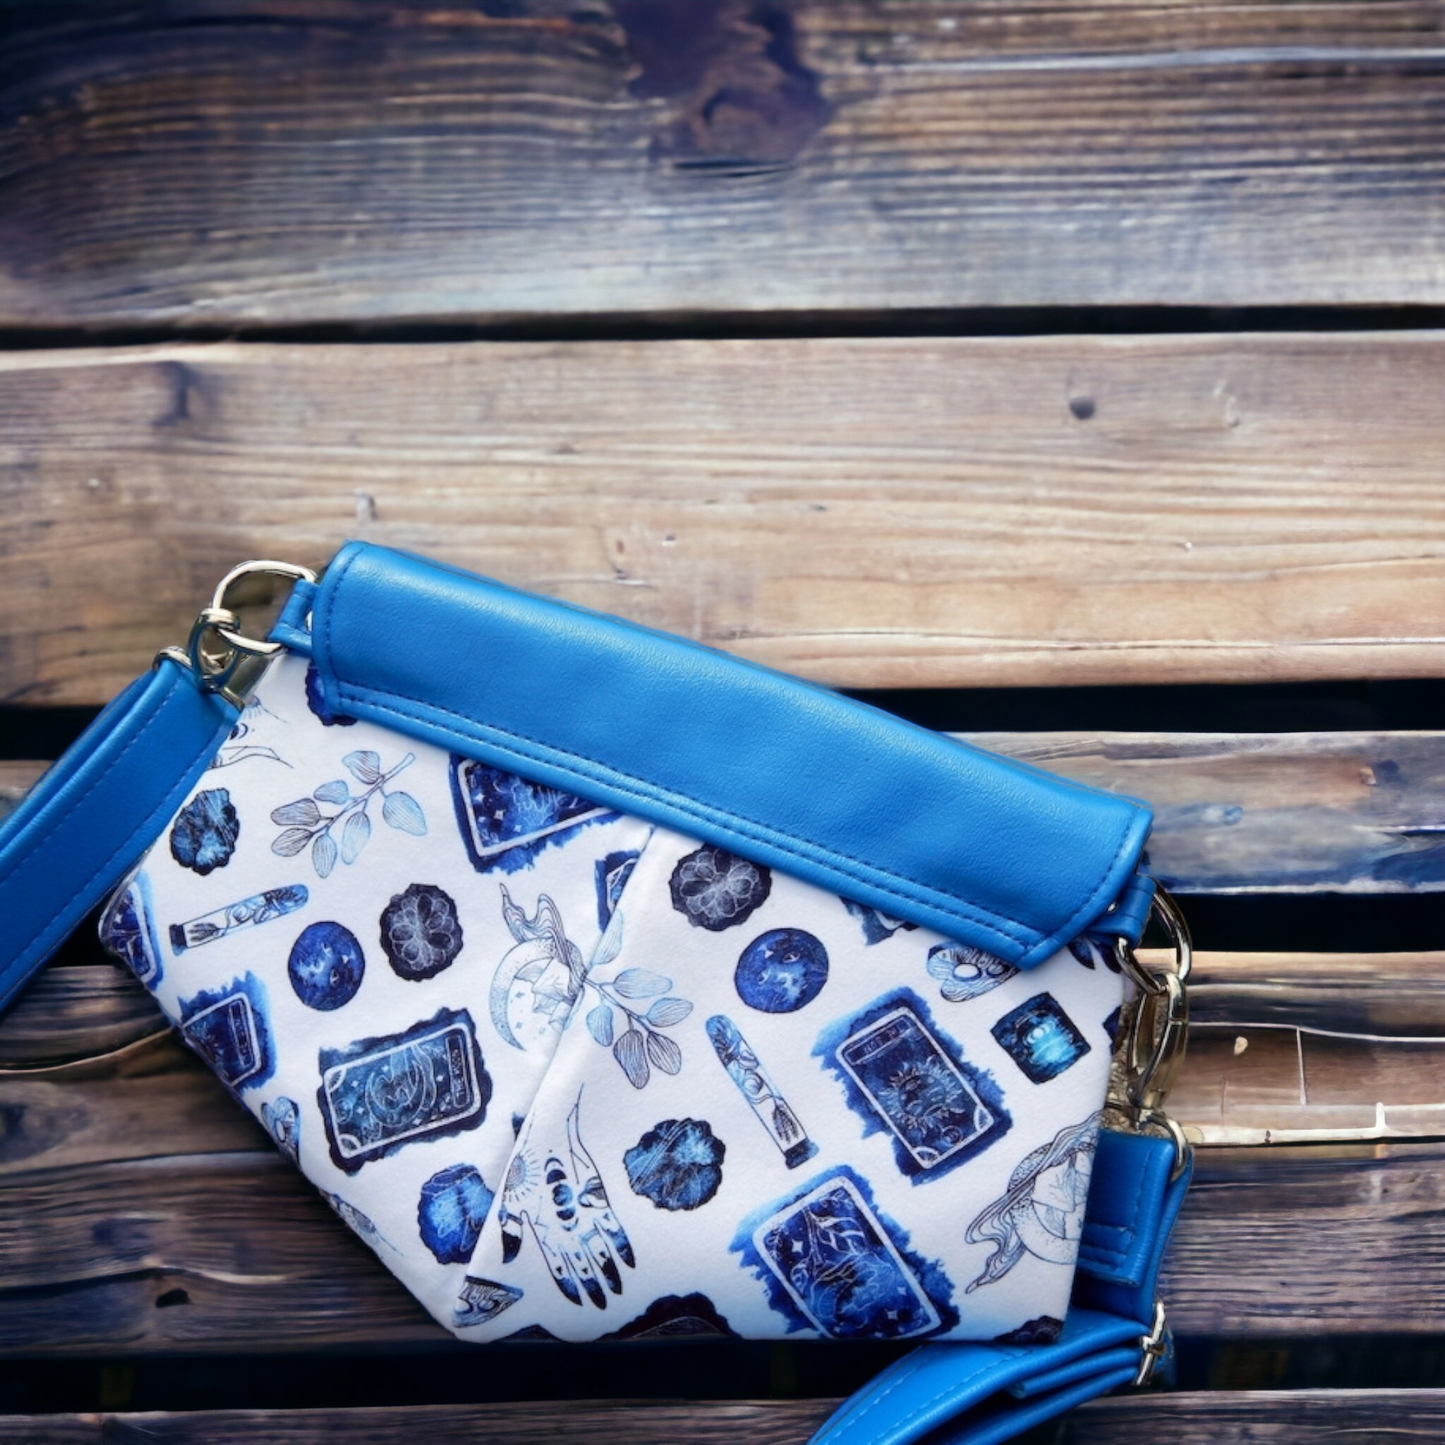 Witchy blue crossbody bag